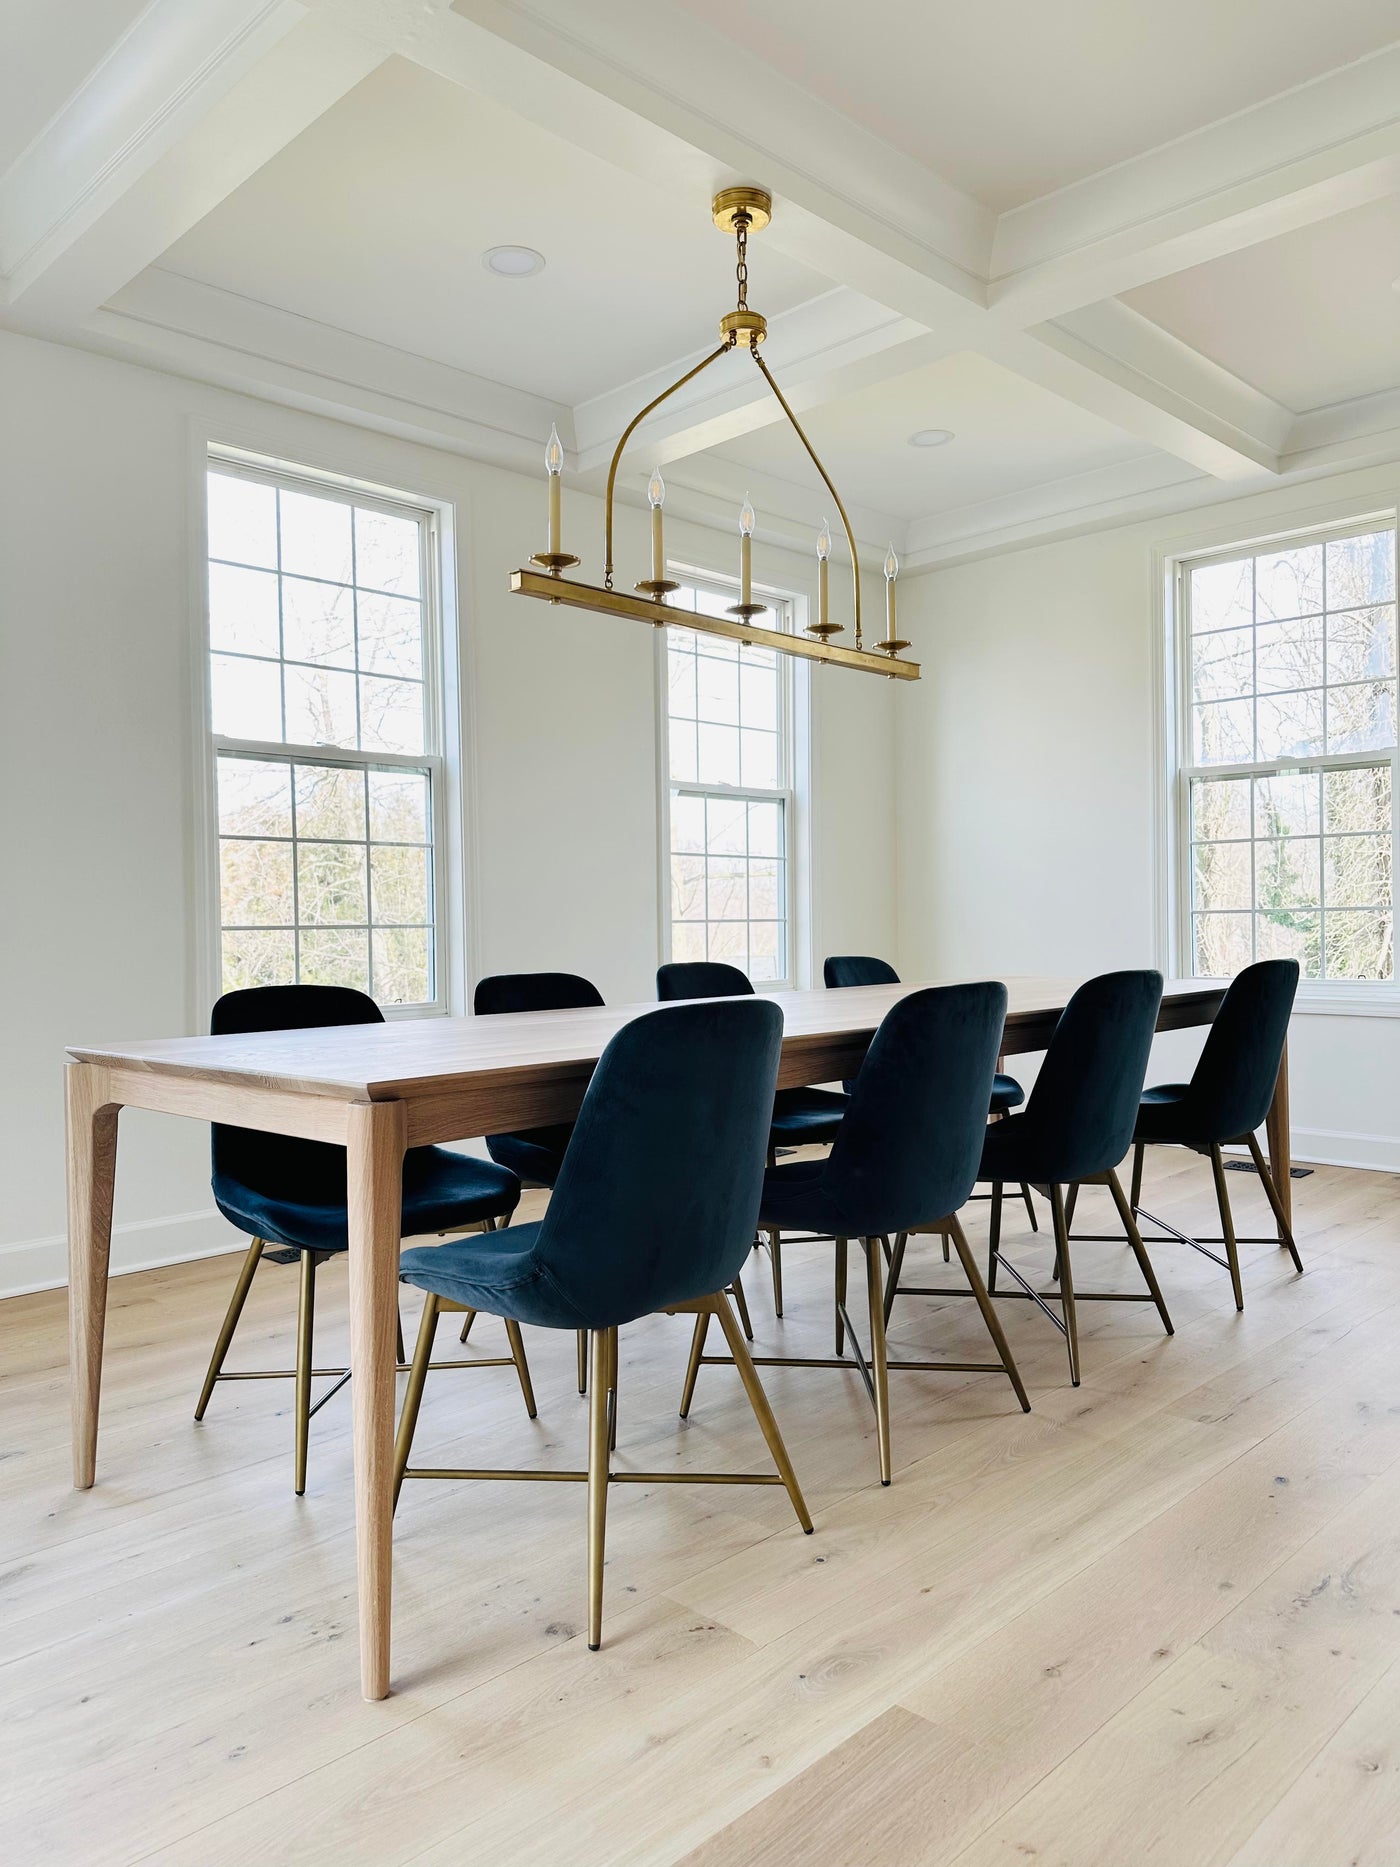 SARI in White oak by Relic Table Co. handmade walnut dining table with 8 chairs modern dining room by interior designer